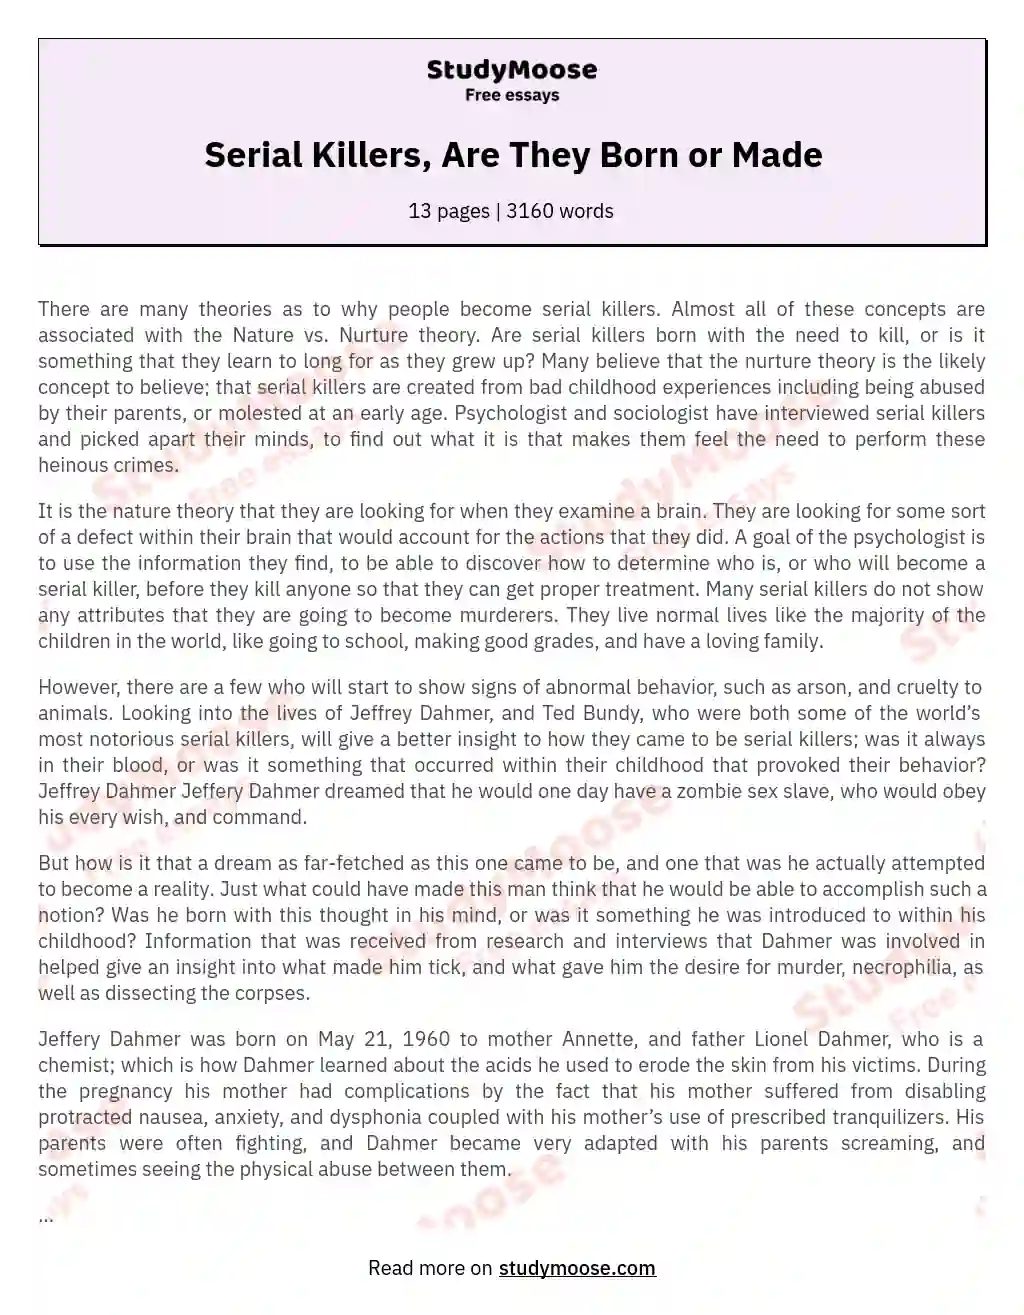 Serial Killers, Are They Born or Made essay